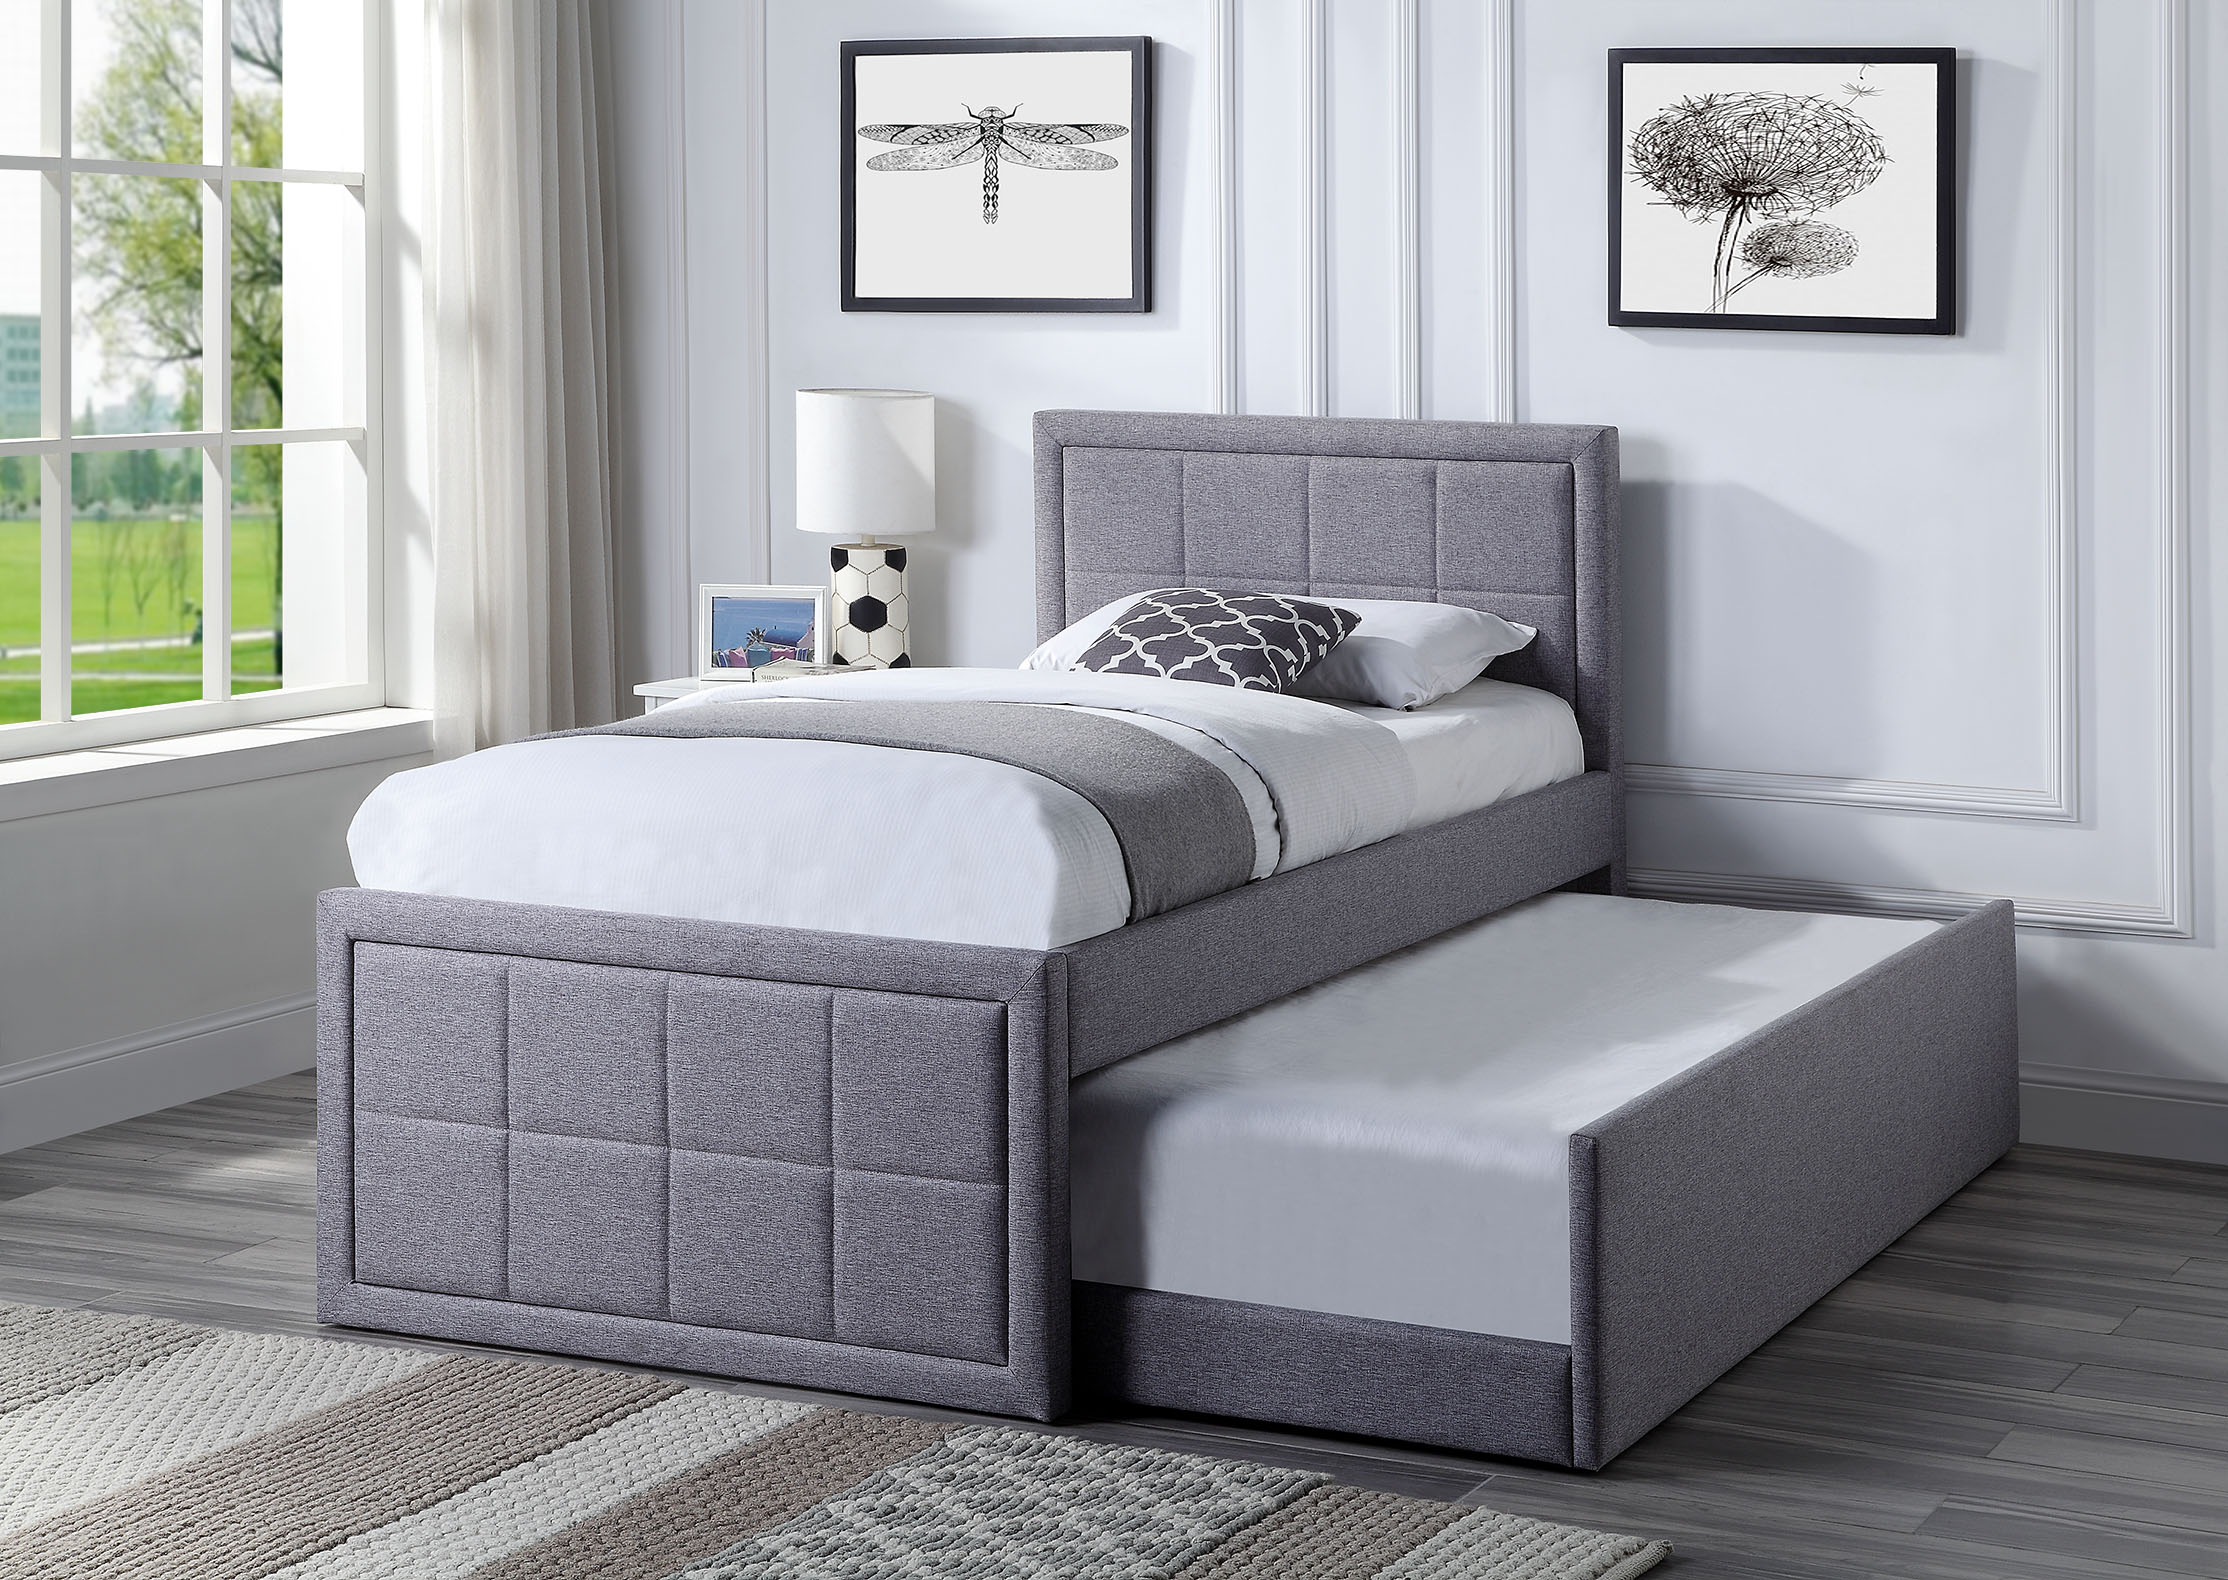 Single Trundle Bed Frame With Pull Out, King Size Bed Frame With Trundle